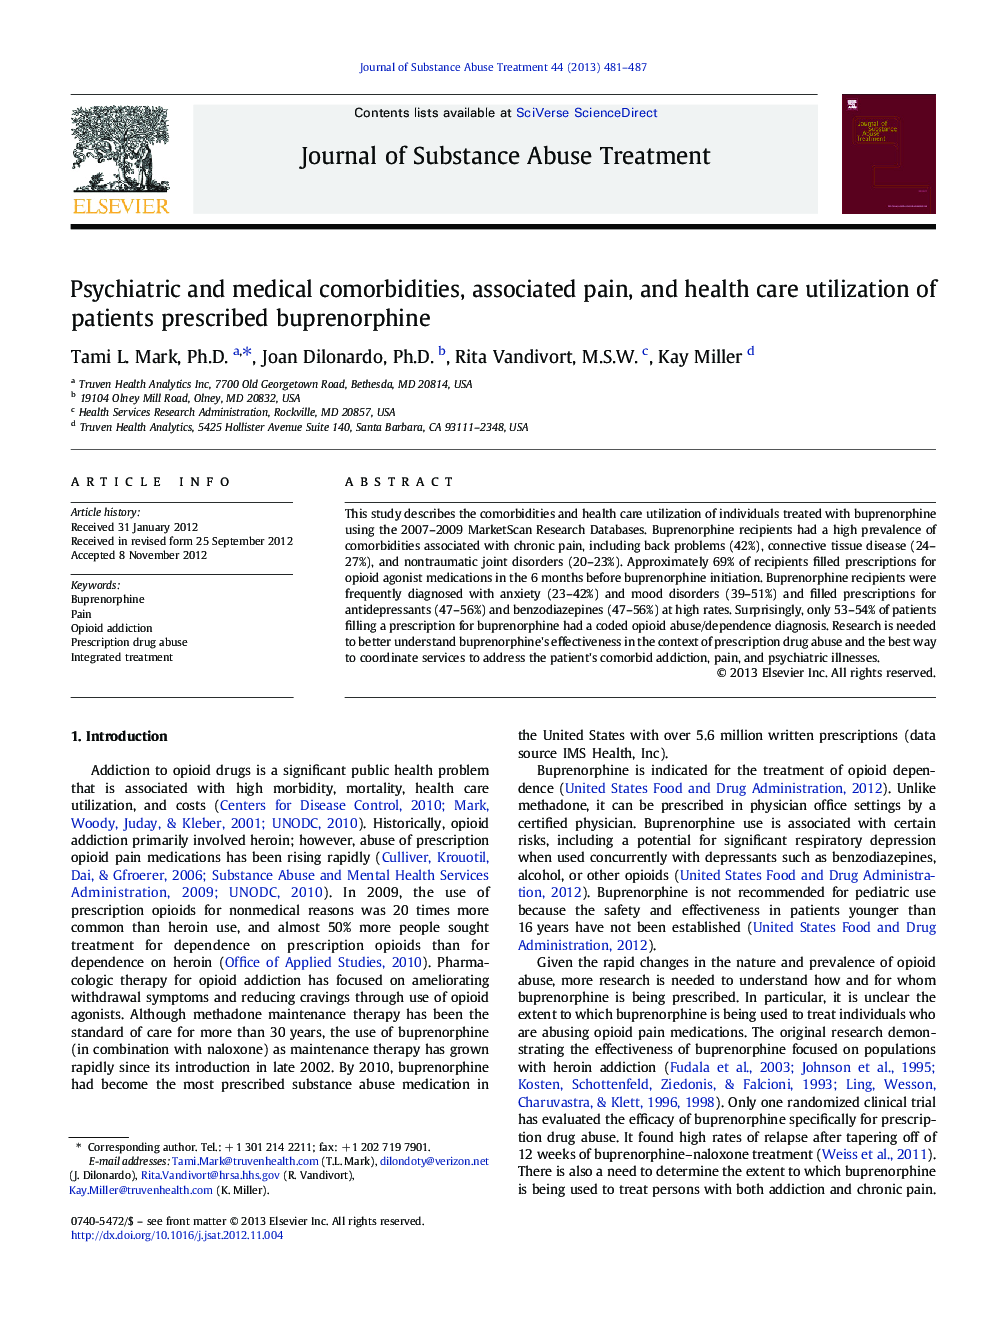 Psychiatric and medical comorbidities, associated pain, and health care utilization of patients prescribed buprenorphine